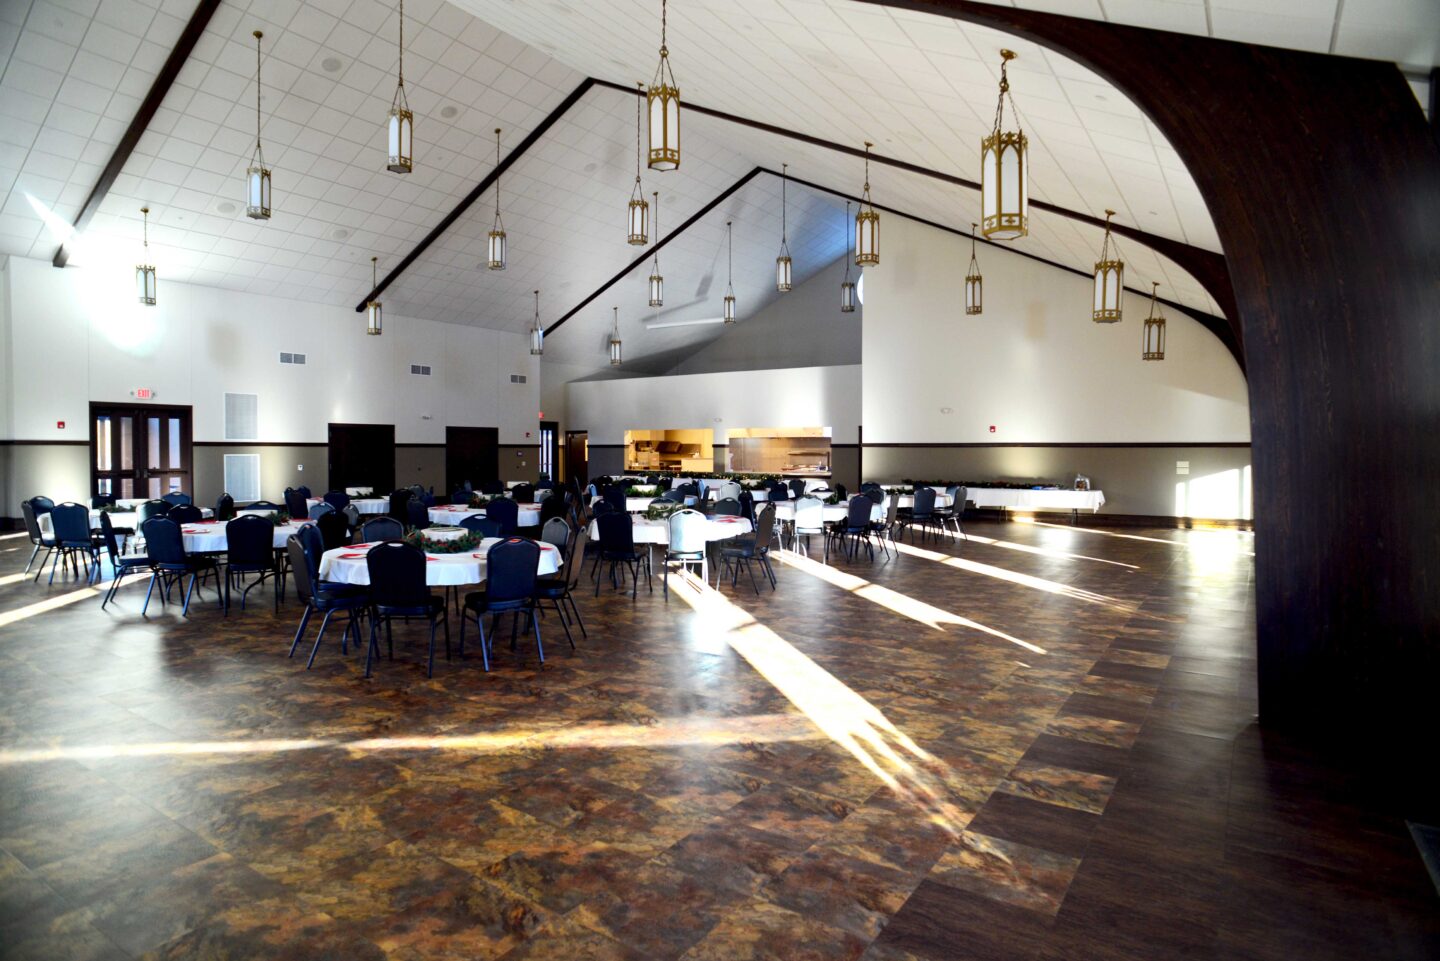 The great hall addition is set for a seated event at Sacred Heart Cathedral